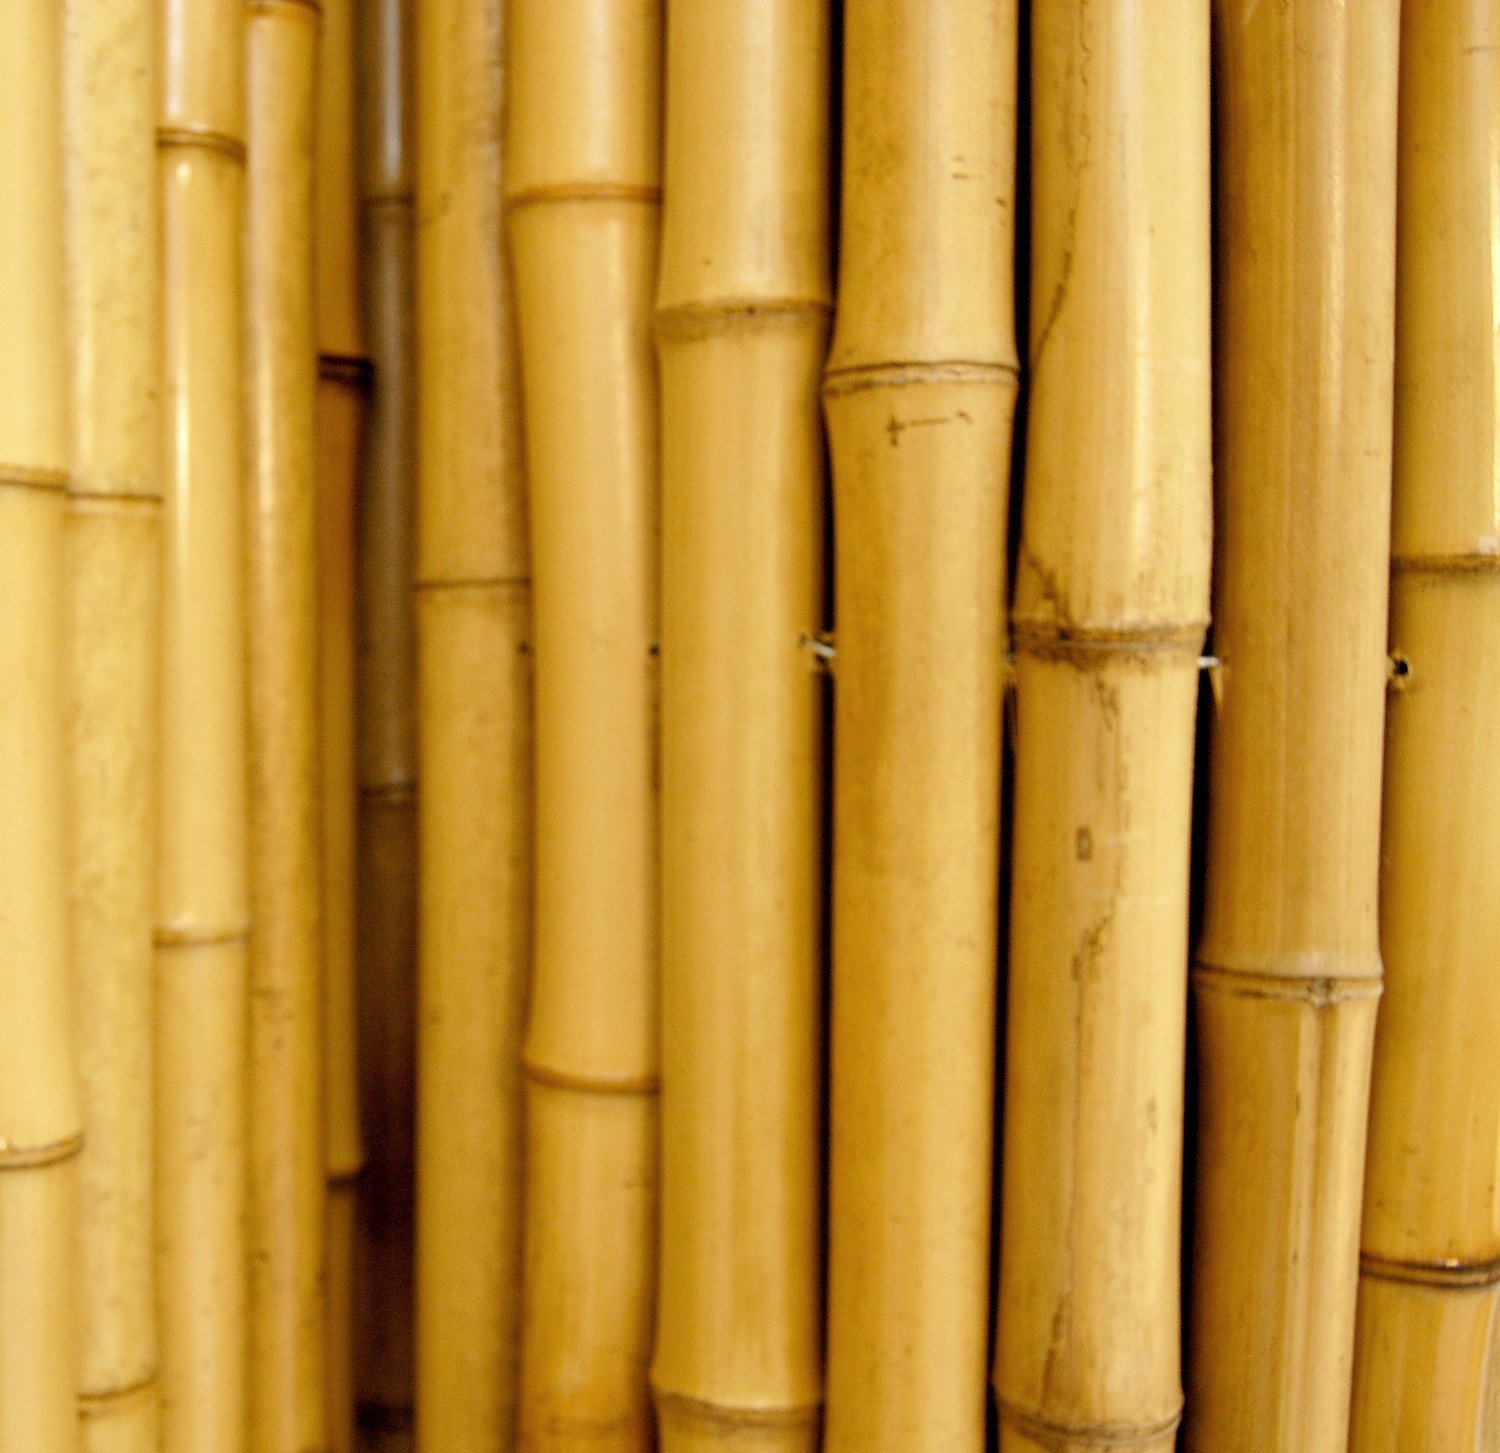 Amazon.com : Natural Rolled Bamboo Fencing 3/4